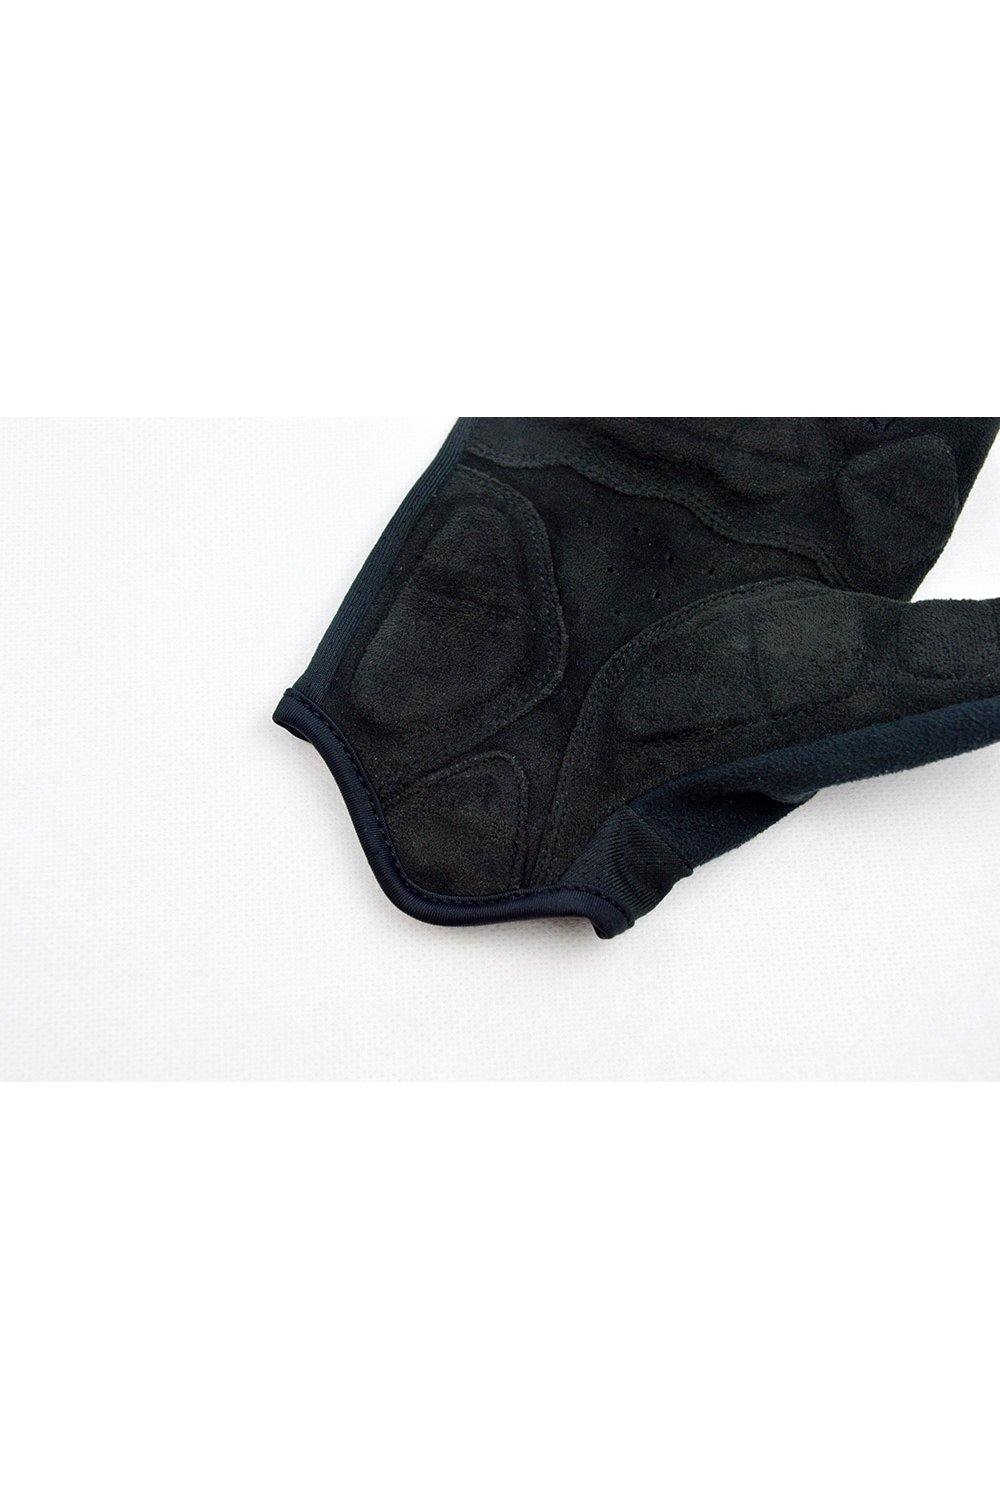 Sundried Black Fingerless Cycle Gloves Gloves Activewear